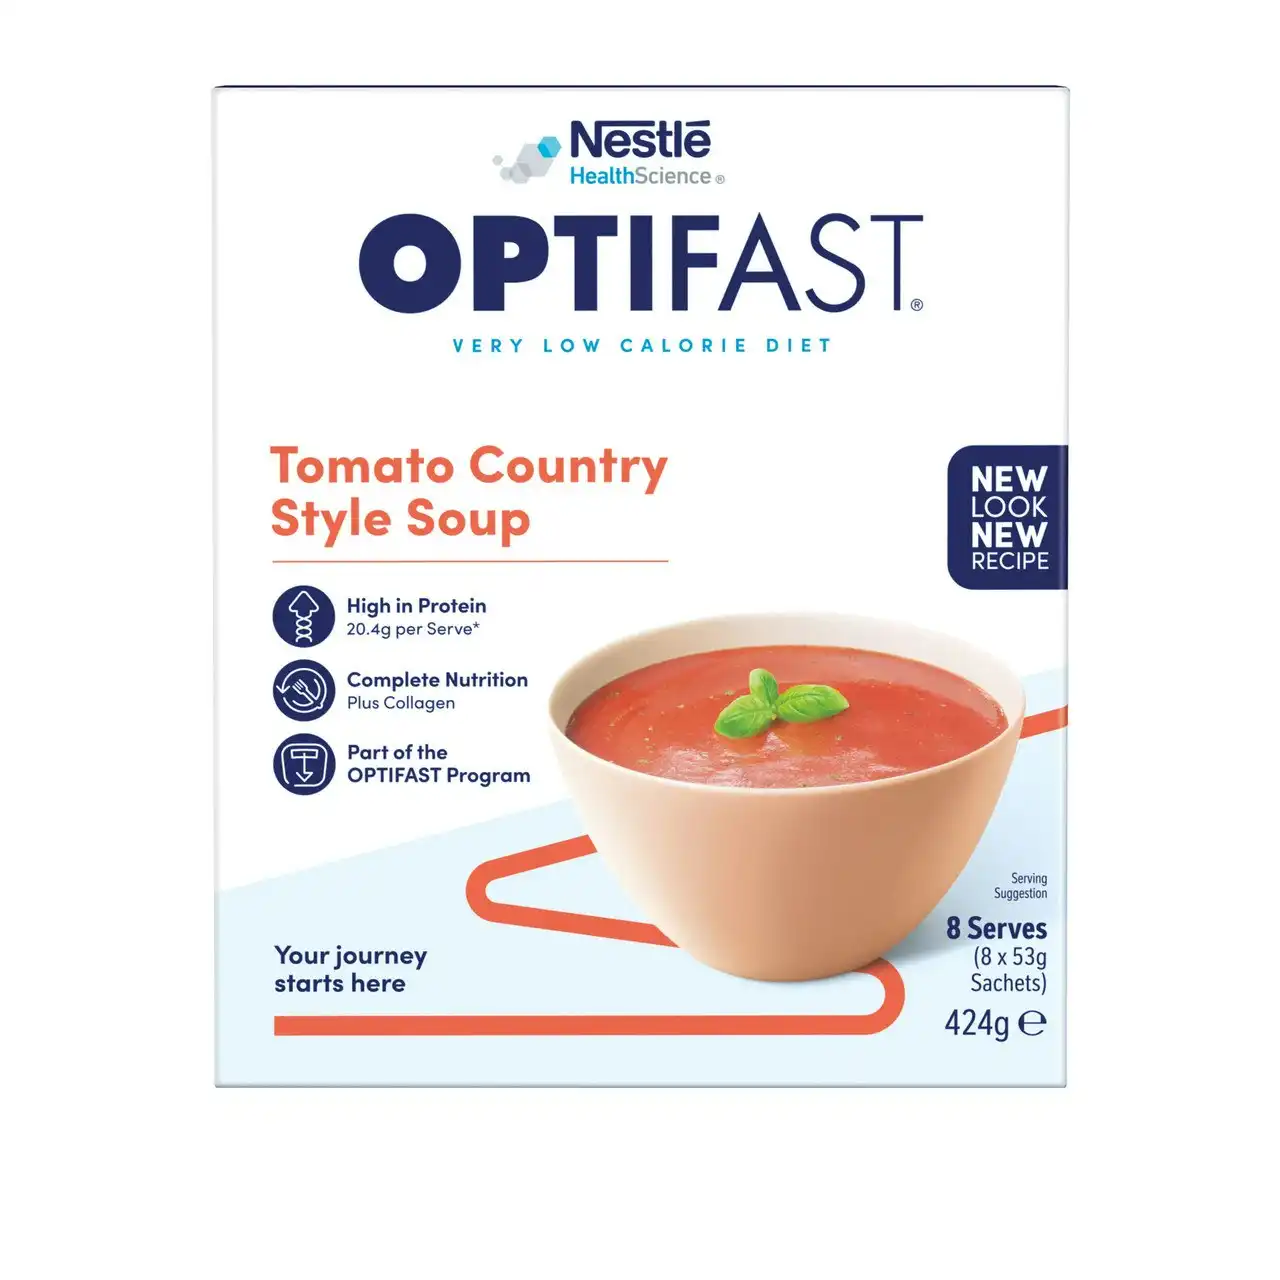 OPTIFAST VLCD Soup Tomato